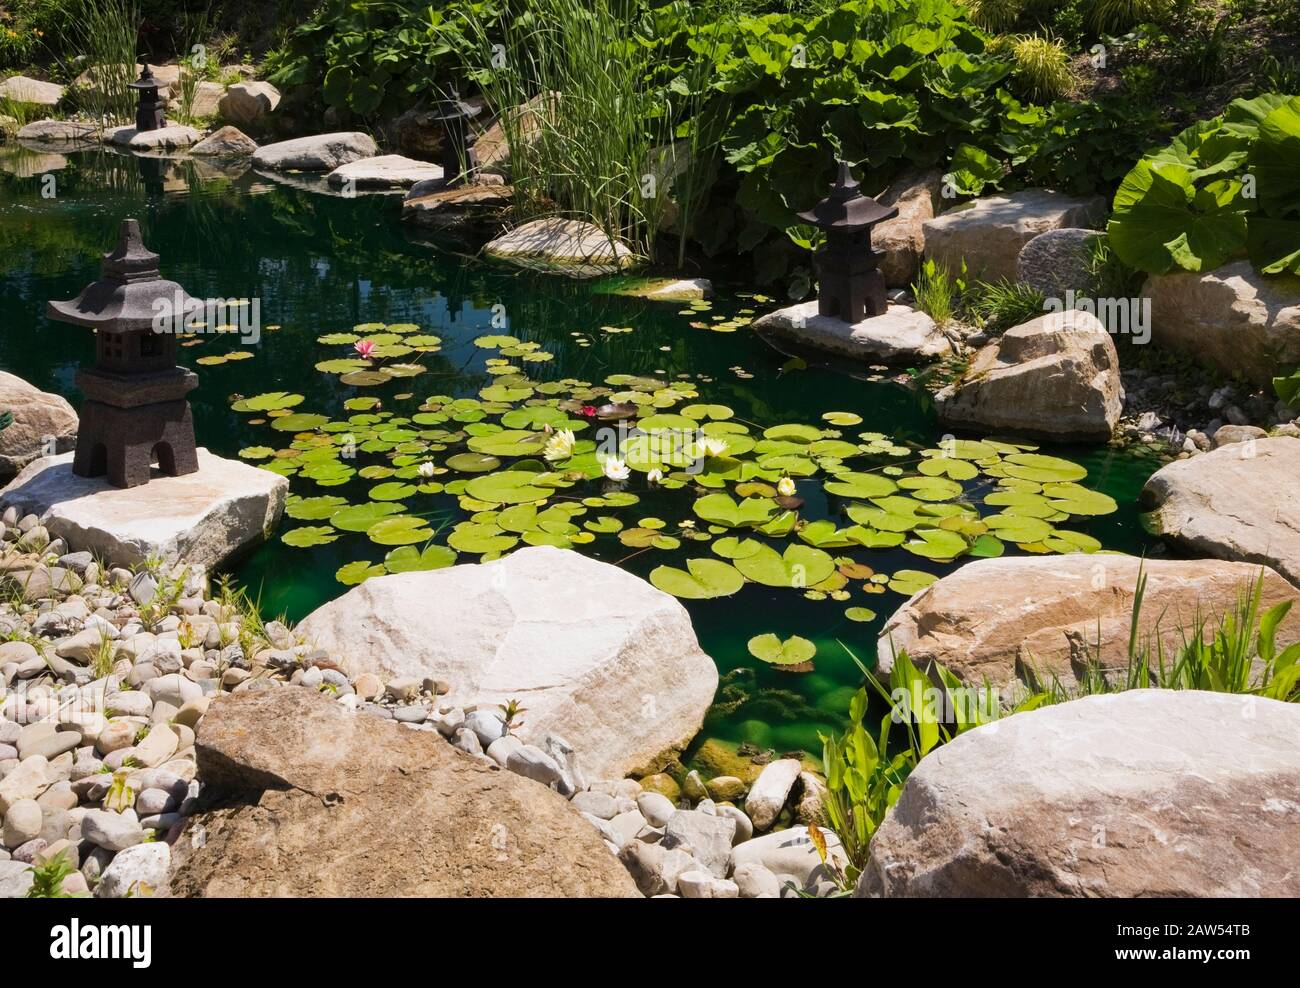 Pond with pink, white red and yellow Nymphaea - Water Lilies, pagodas bordered by Petasites japonicus - Butterbur plants in late spring in Zen garden Stock Photo